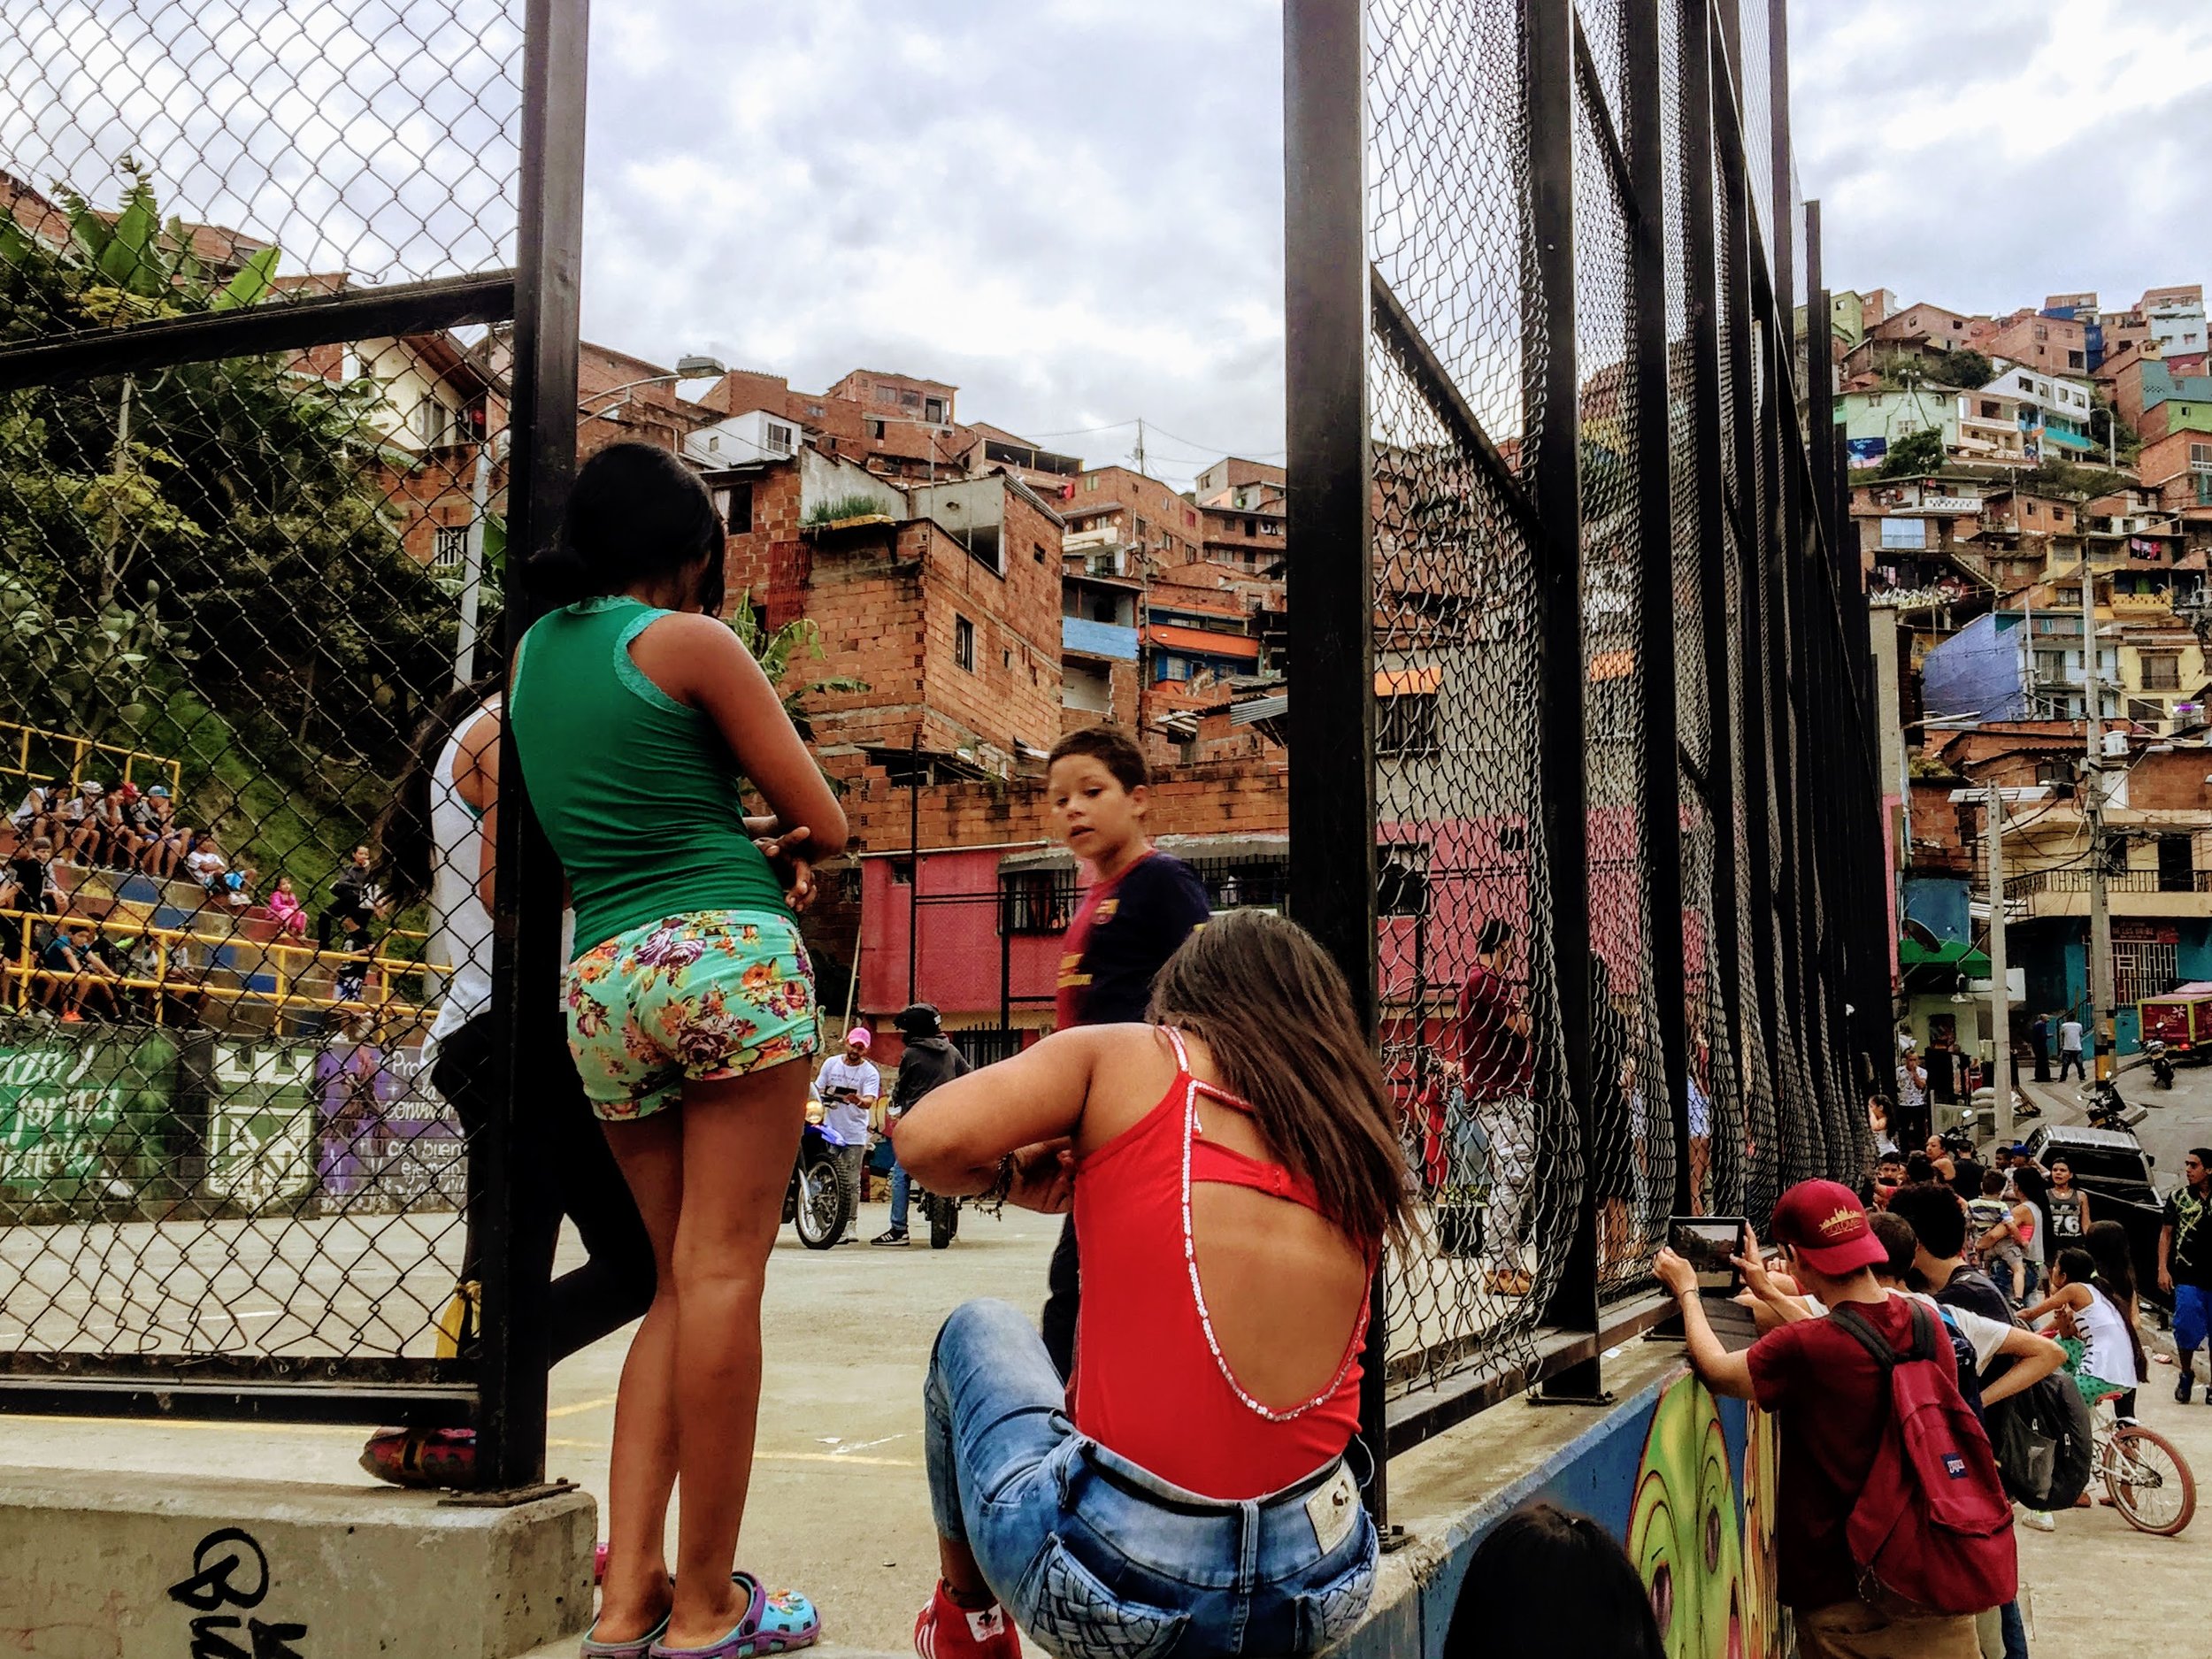 That time we stumbled upon a reggaeton music video being filmed in Medellin, Colombia - where some of the artists on this playlist were born. The genre originated in Puerto Rico.